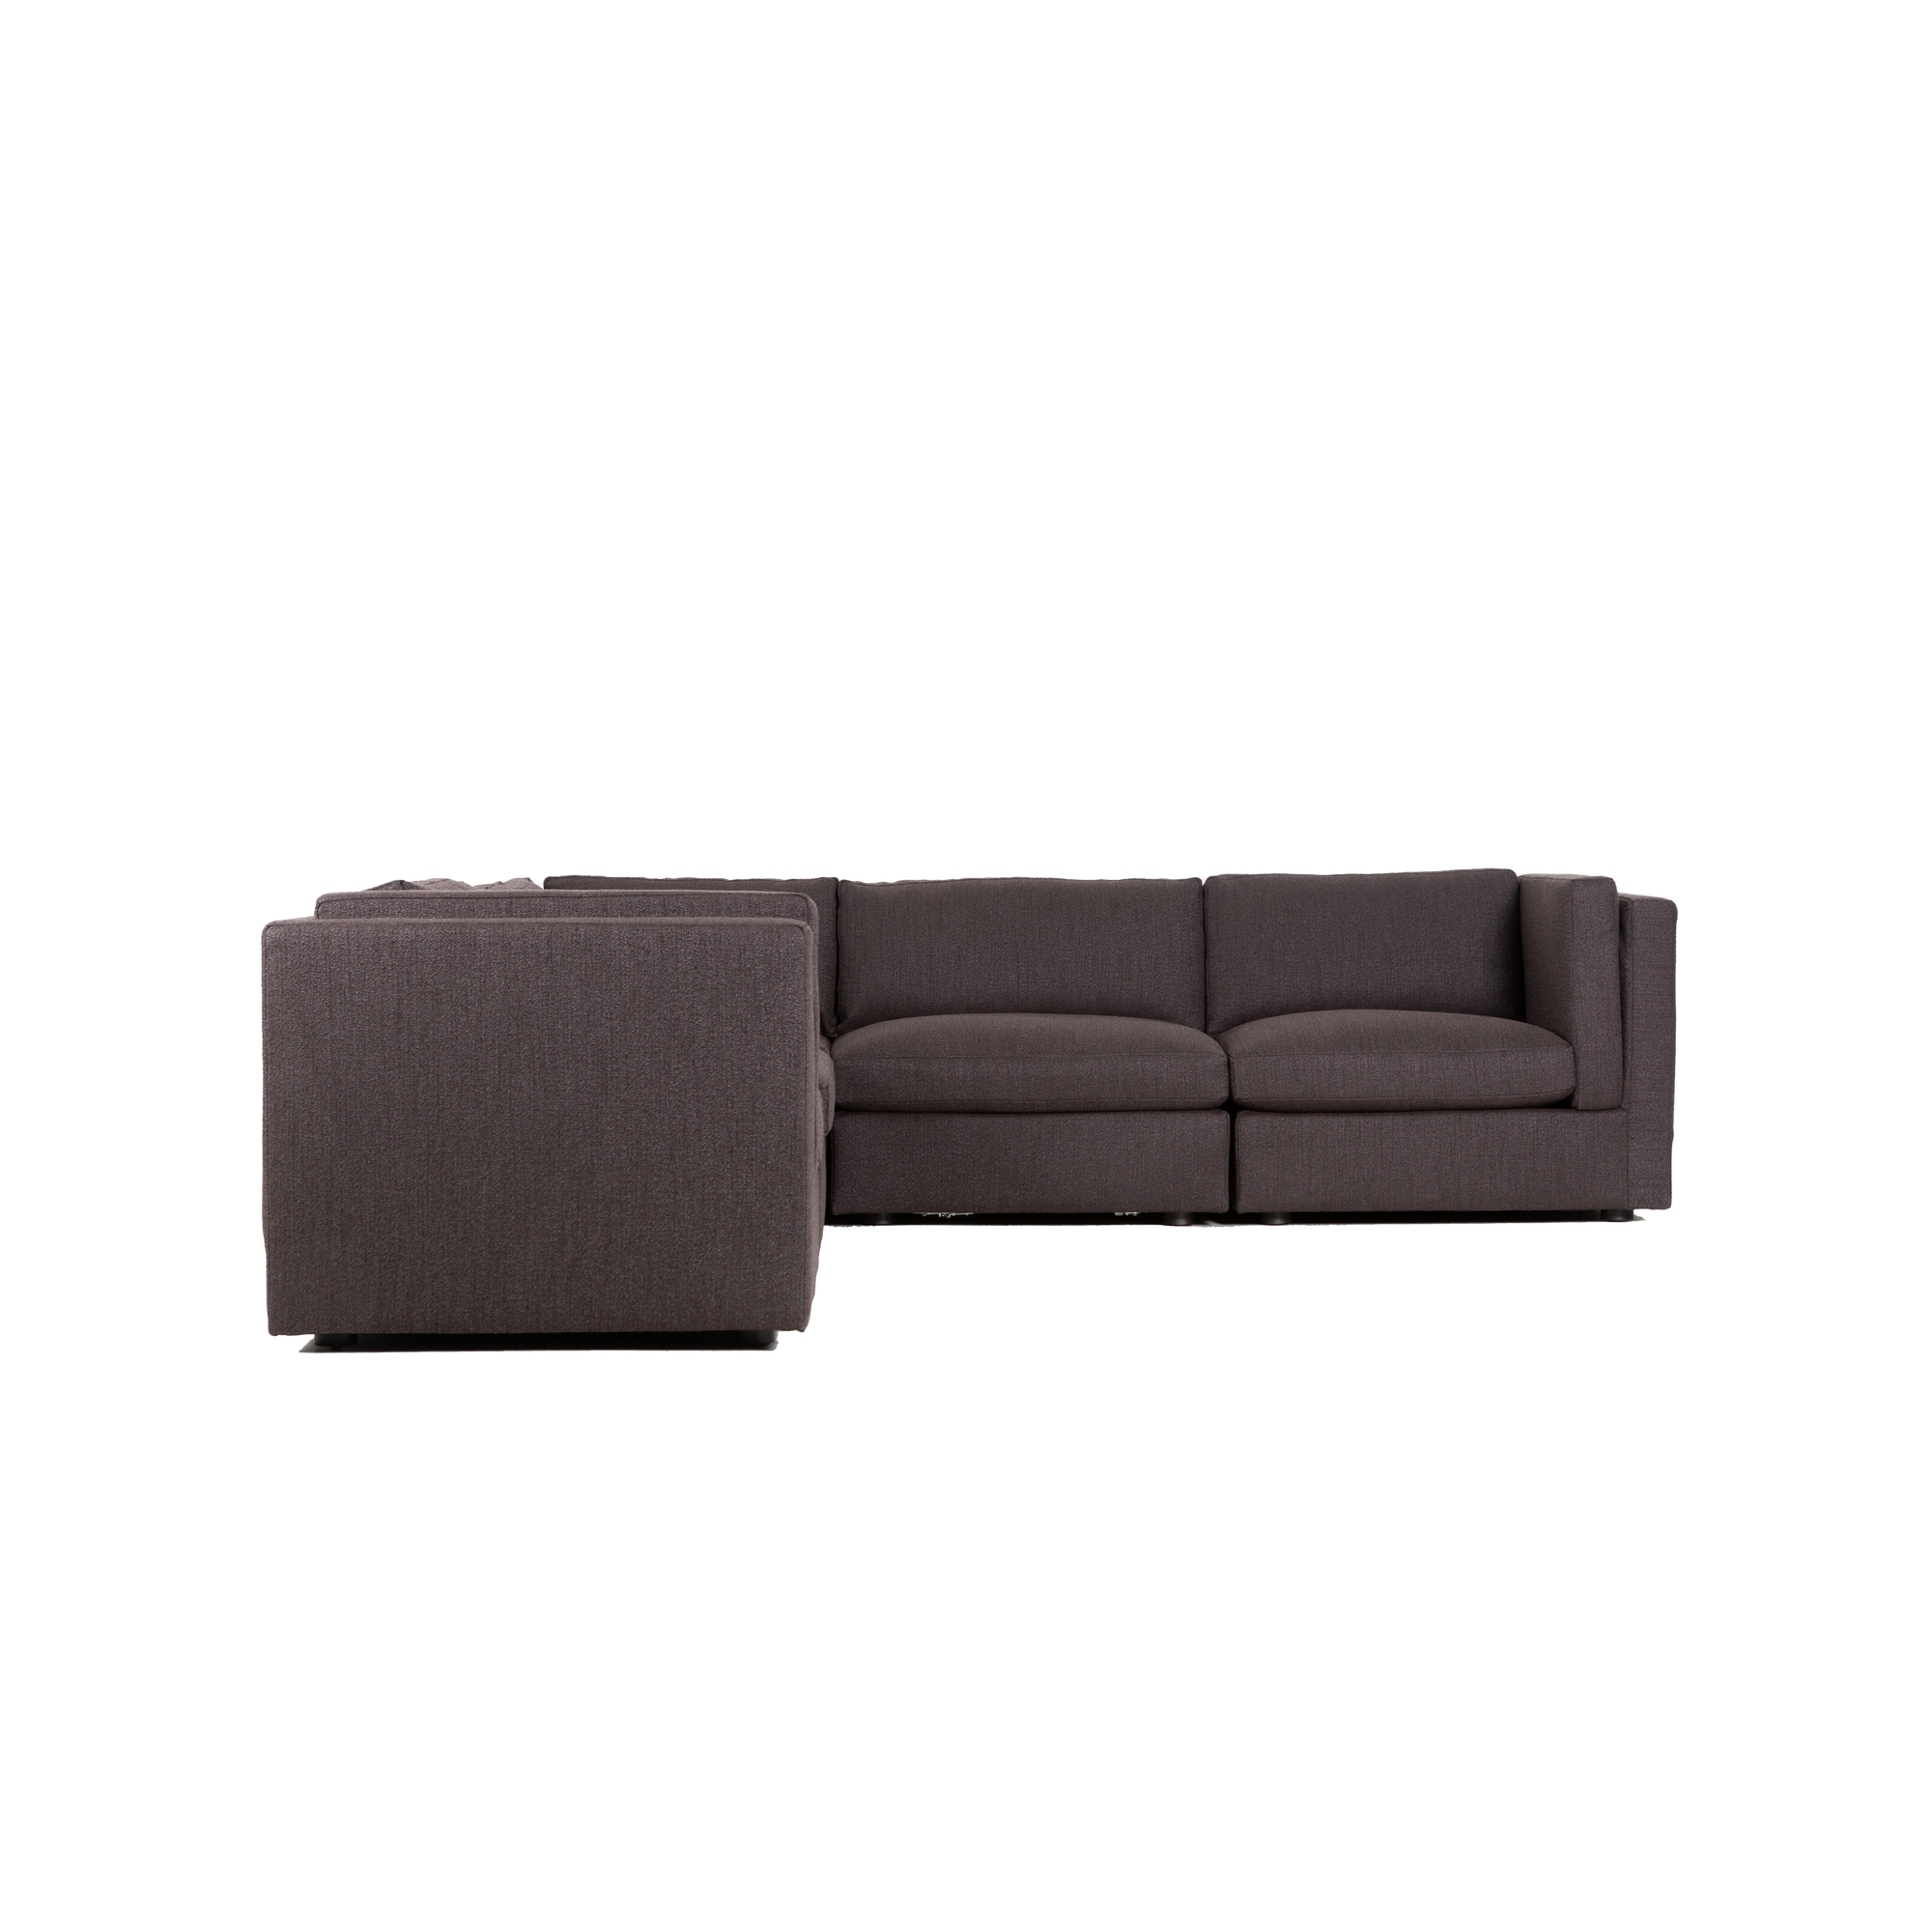 Experience the essence of Danish Modernism reimagined with our Kore Sectional Collection, a tribute to the iconic design legacy of Borge Mogensen.